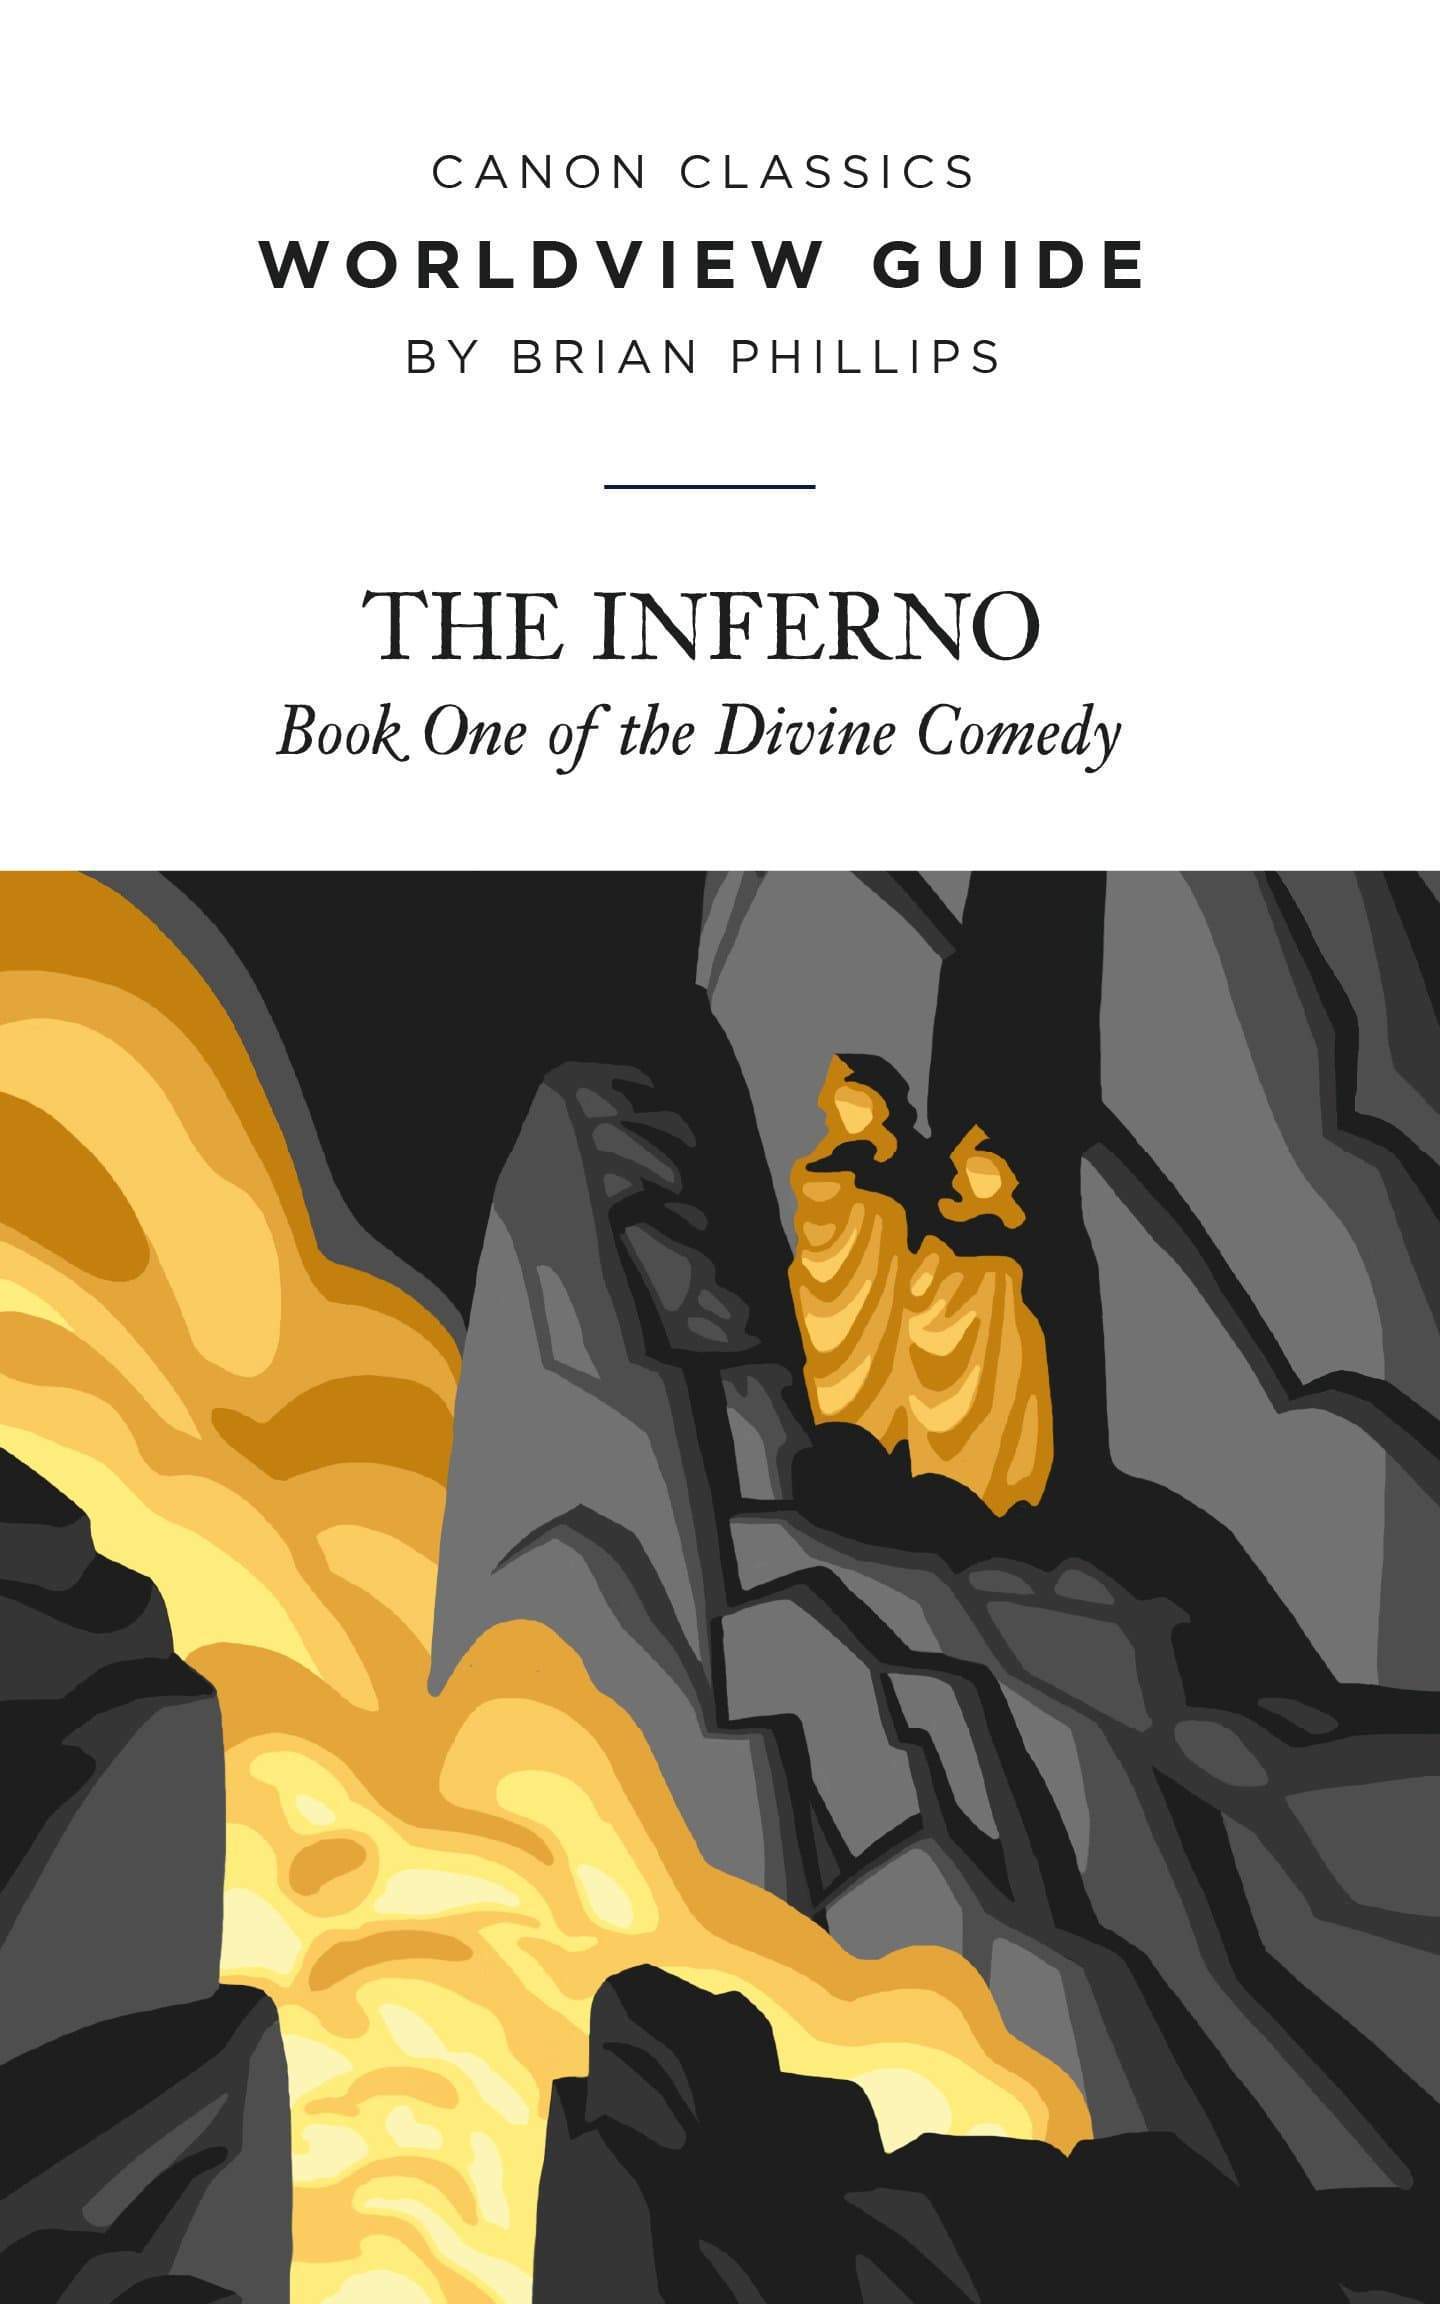 Worldview Guide for Dante's Inferno